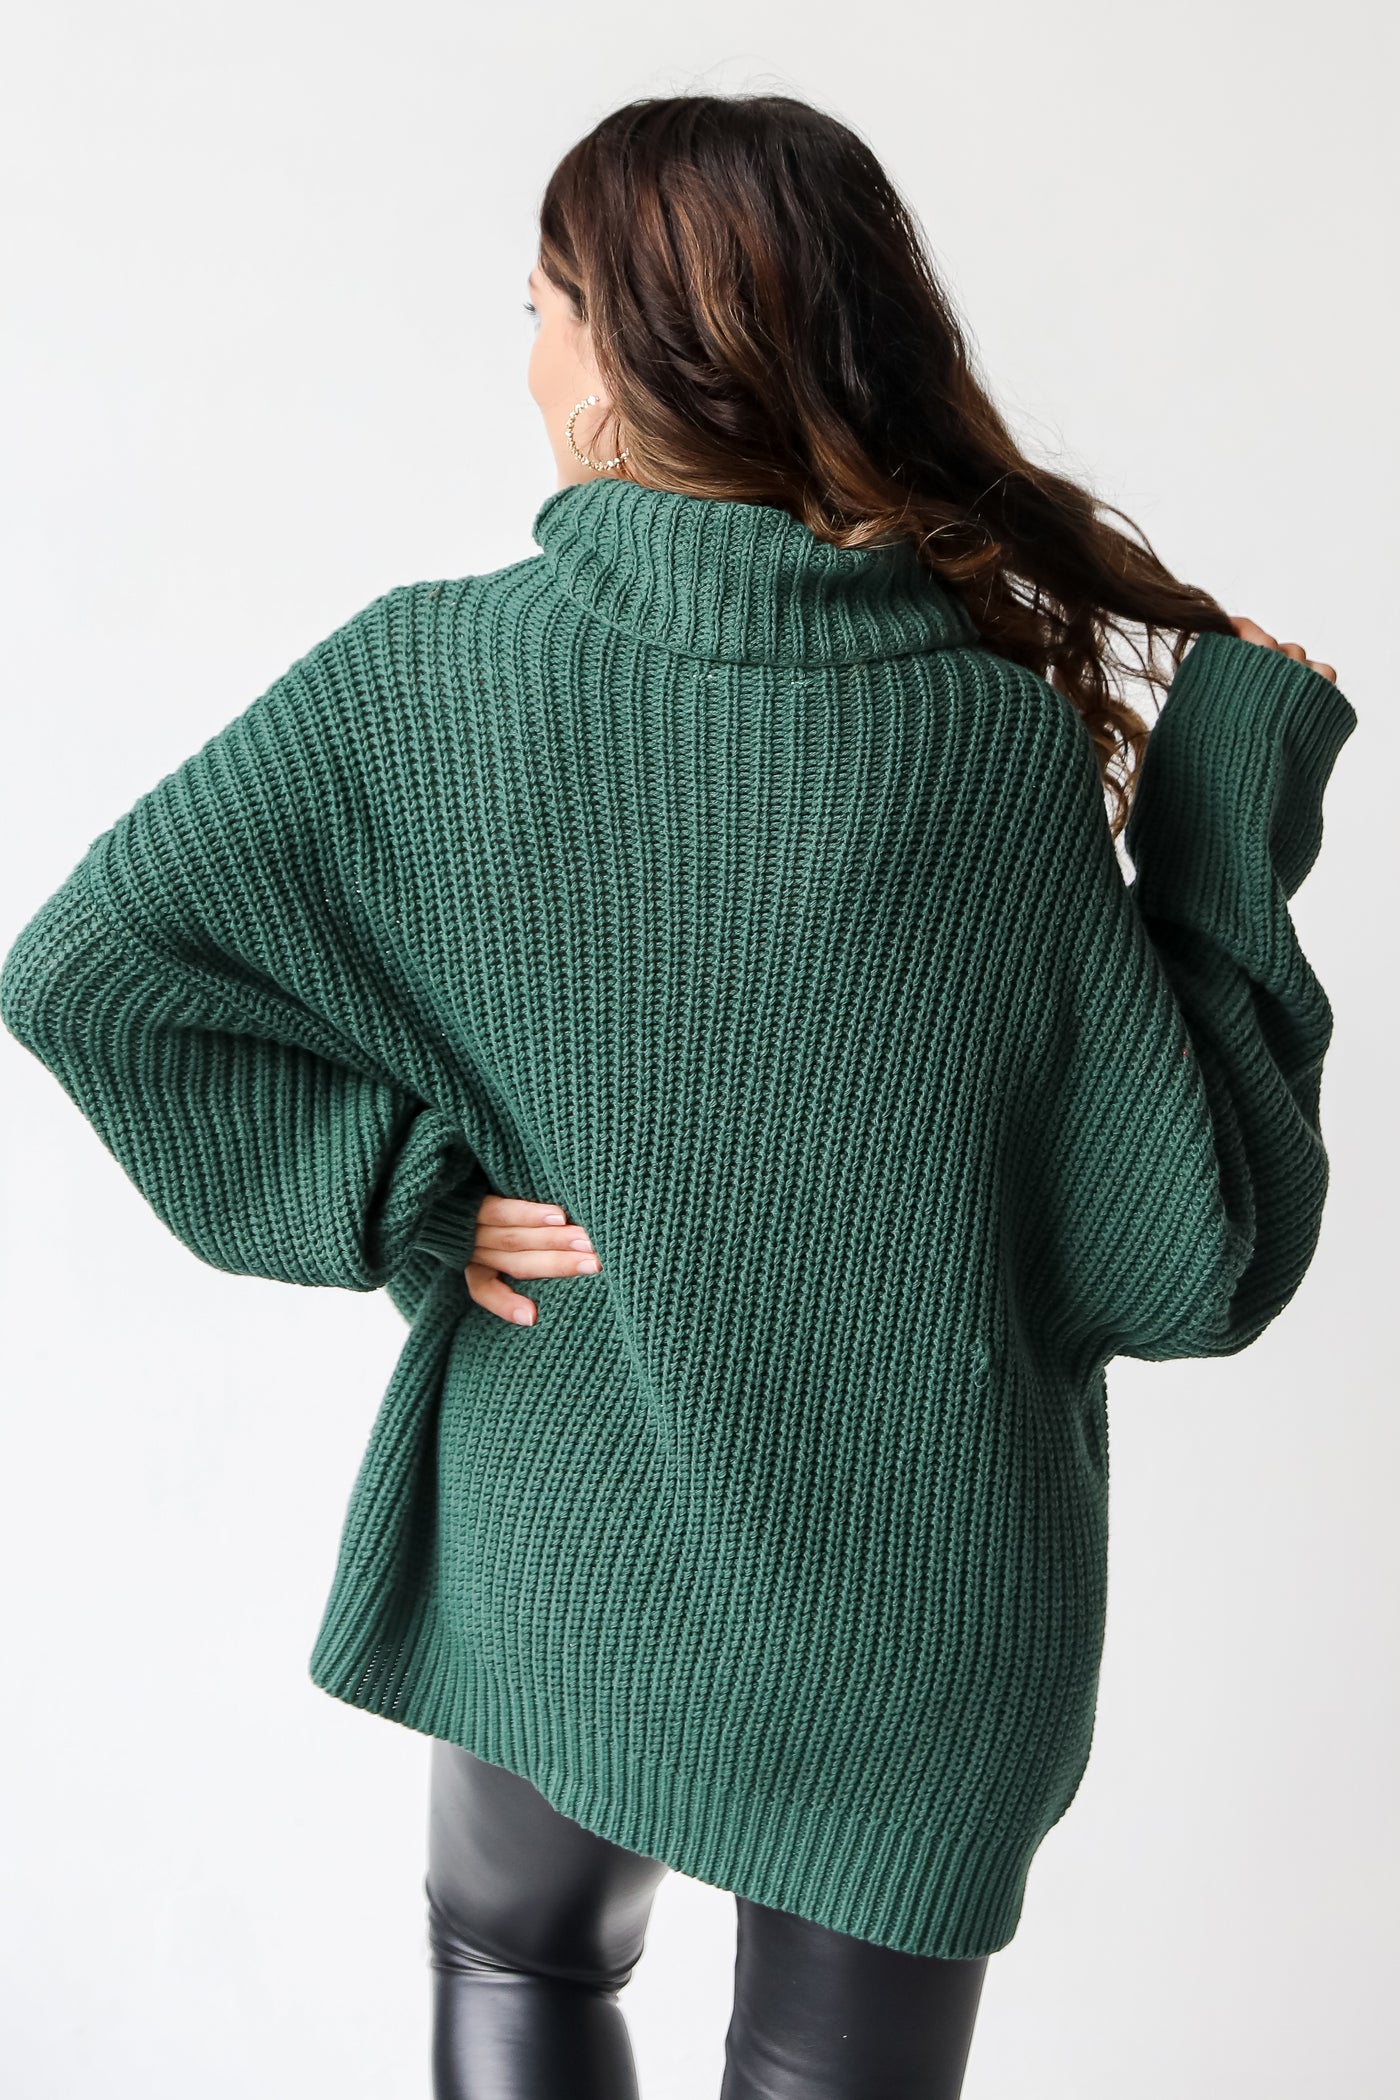 green Turtleneck Sweater back view